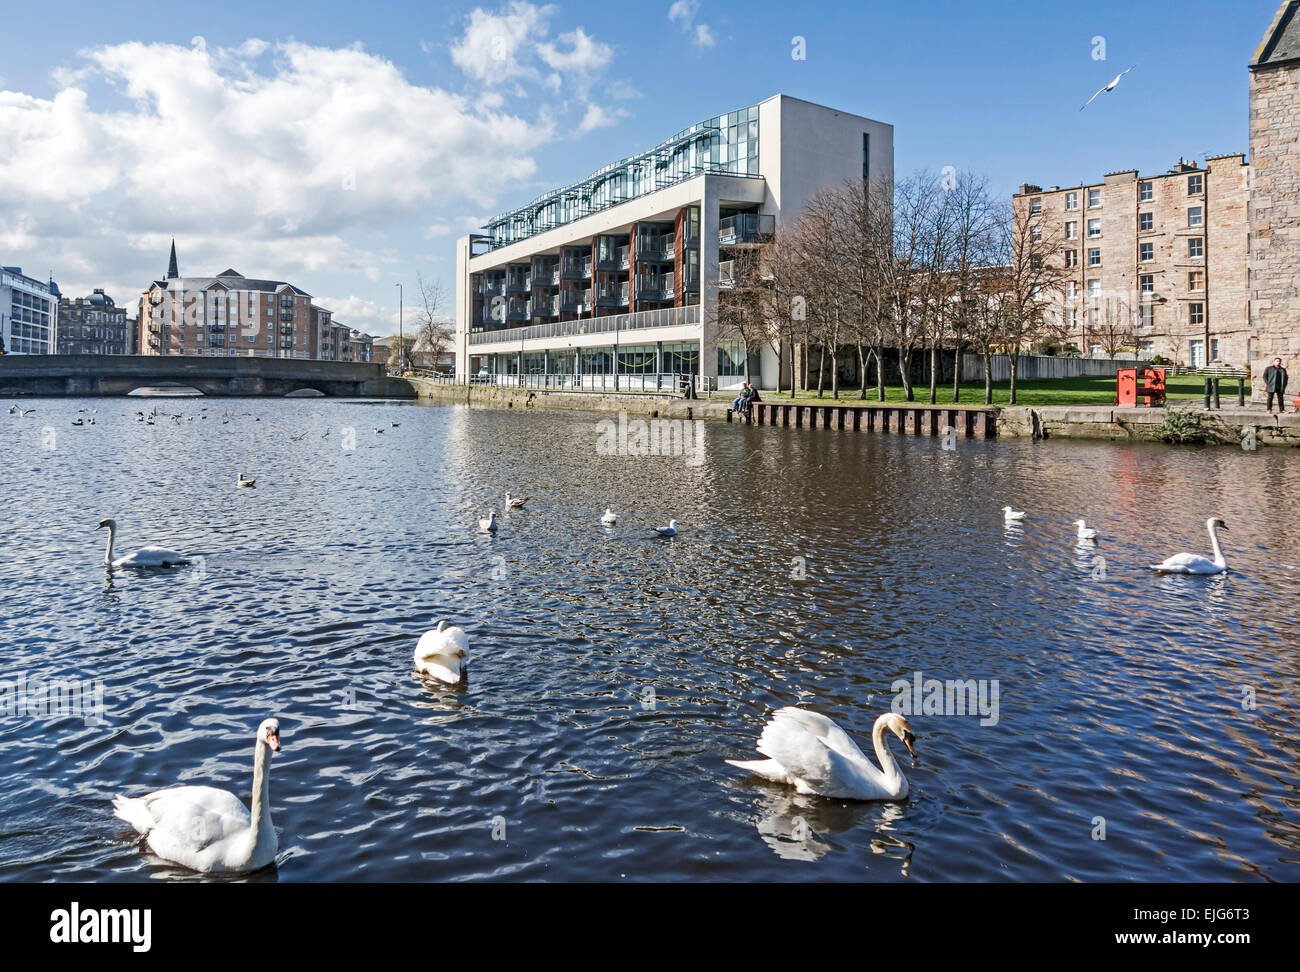 Waterside apartments on Ronaldson's Wharf by Water of Leith in Leith Edinburgh Scotland with swans Stock Photo